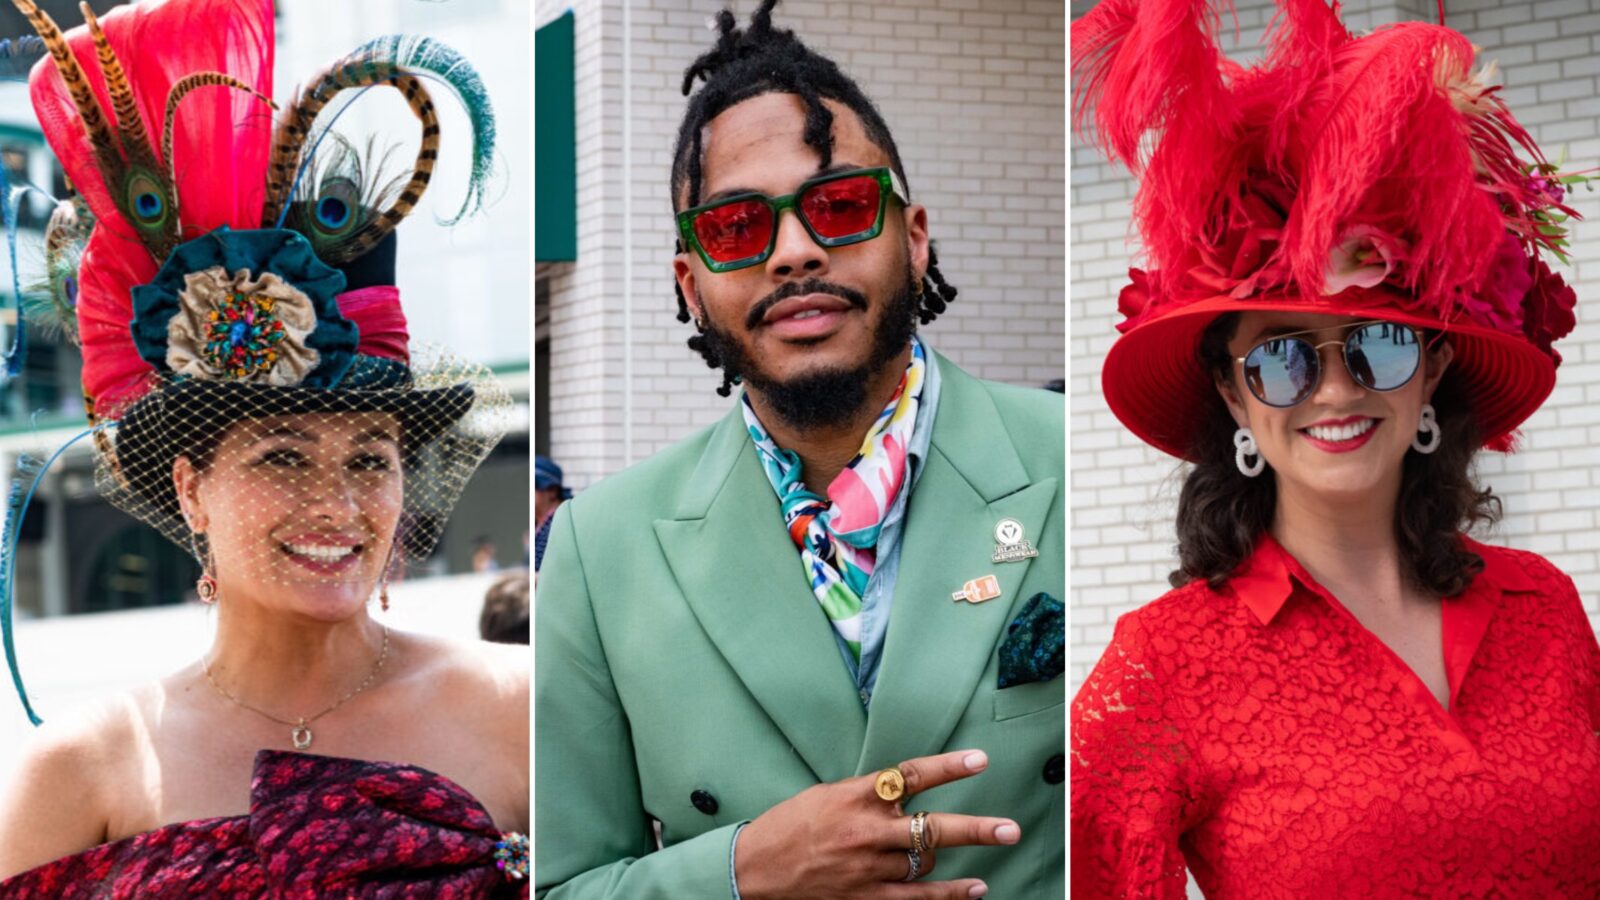 A collage of people at the Kentucky Derby with hats and suits